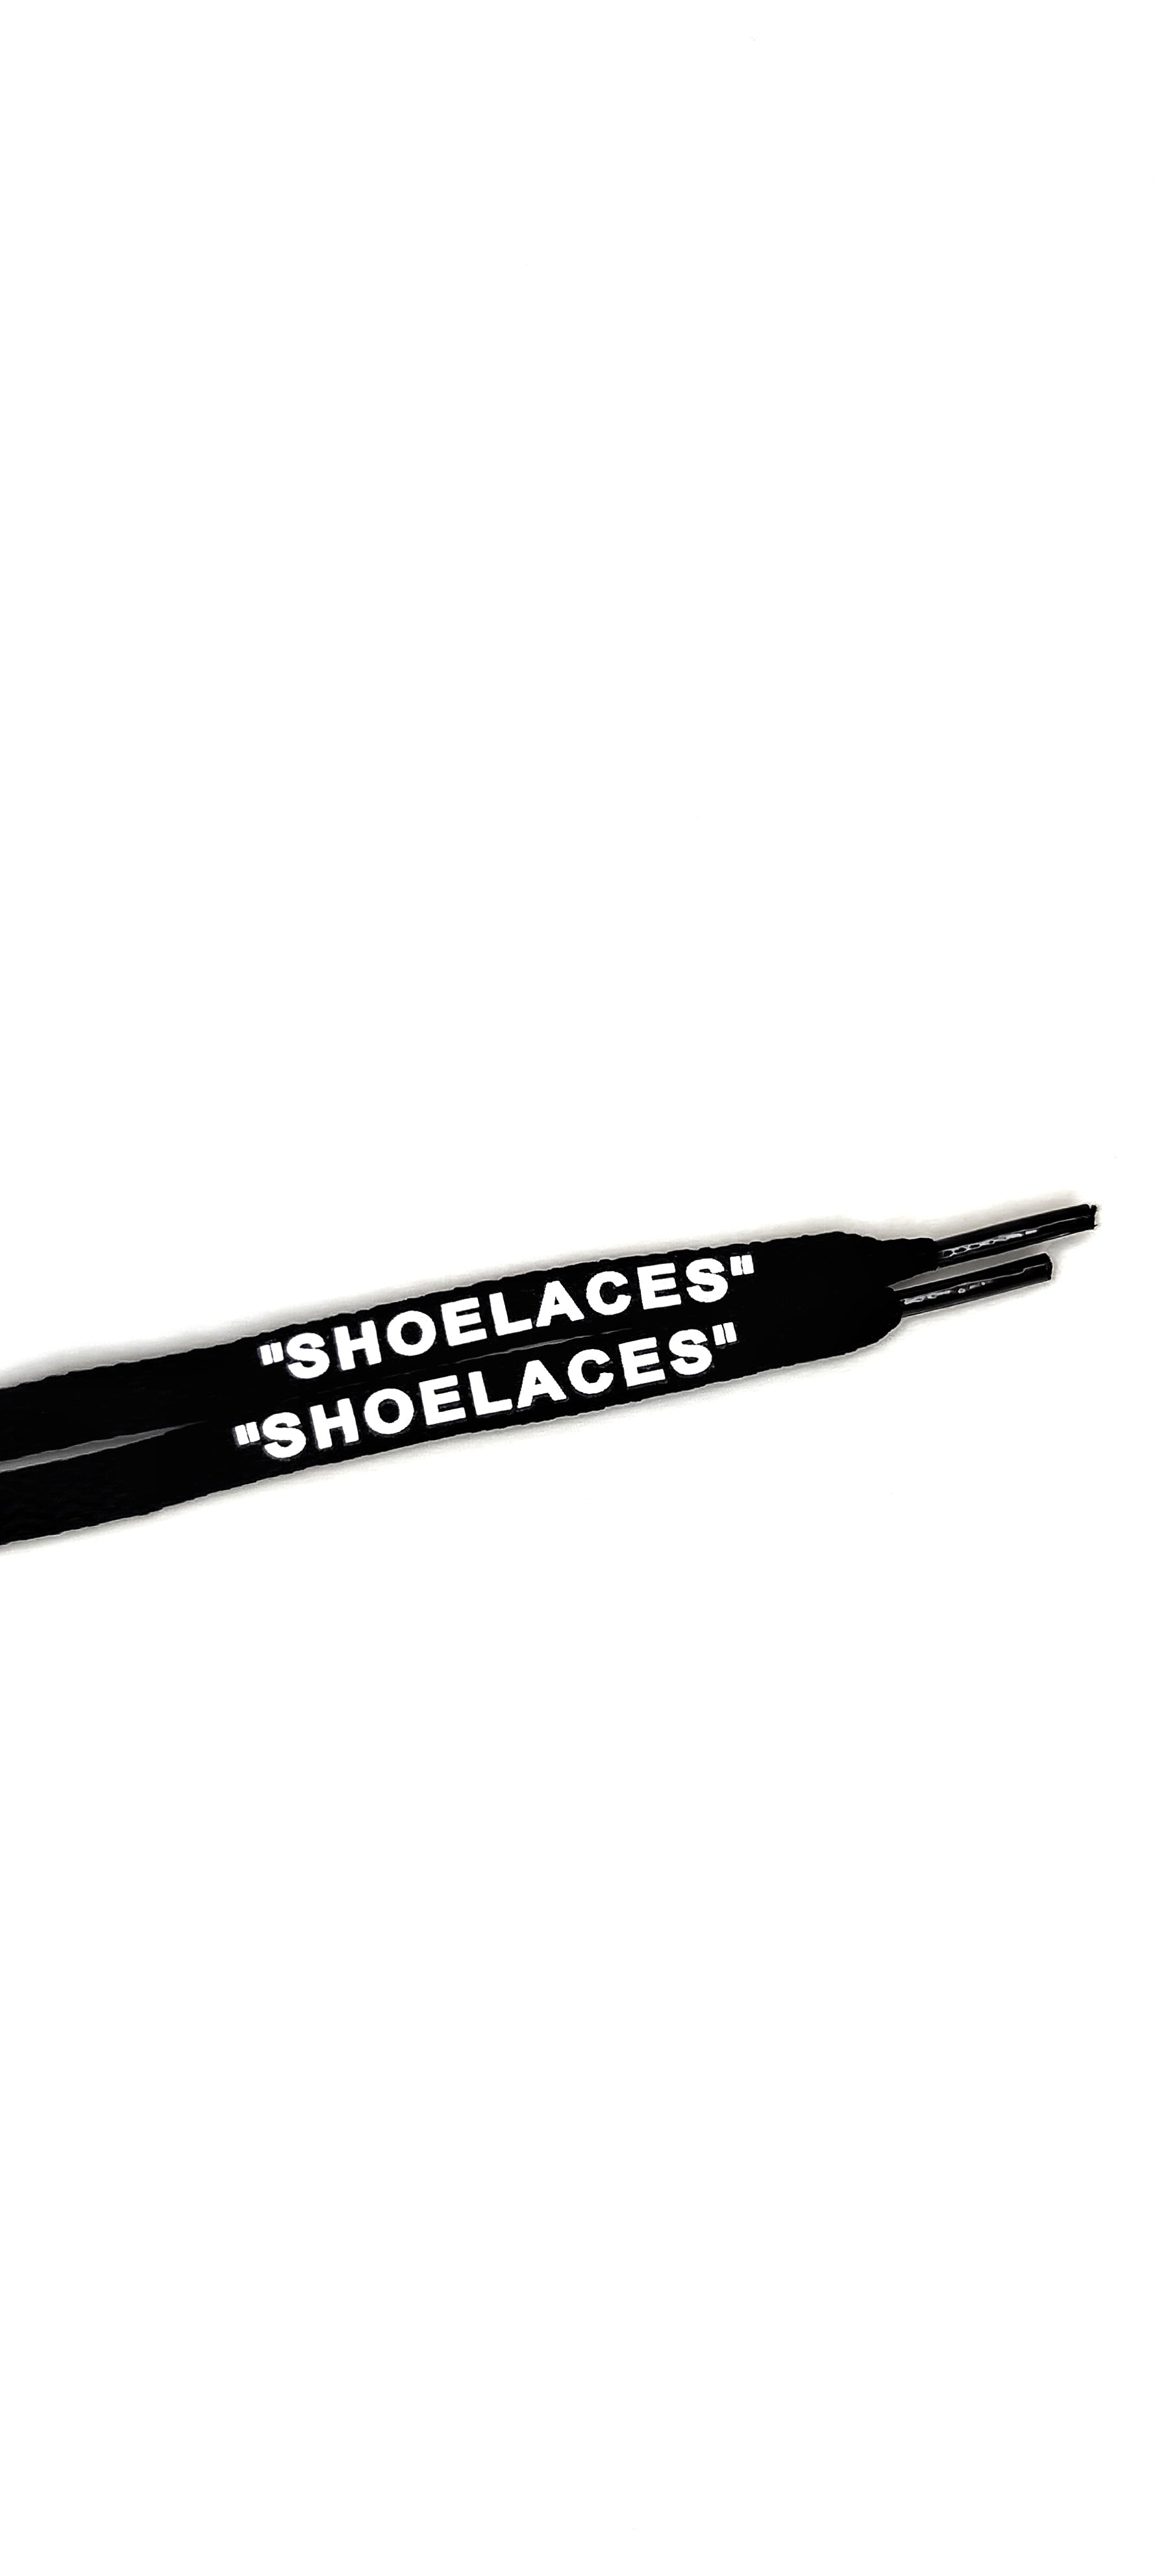 BLACK OFF WHITE STYLE "SHOELACES" BY TGLC